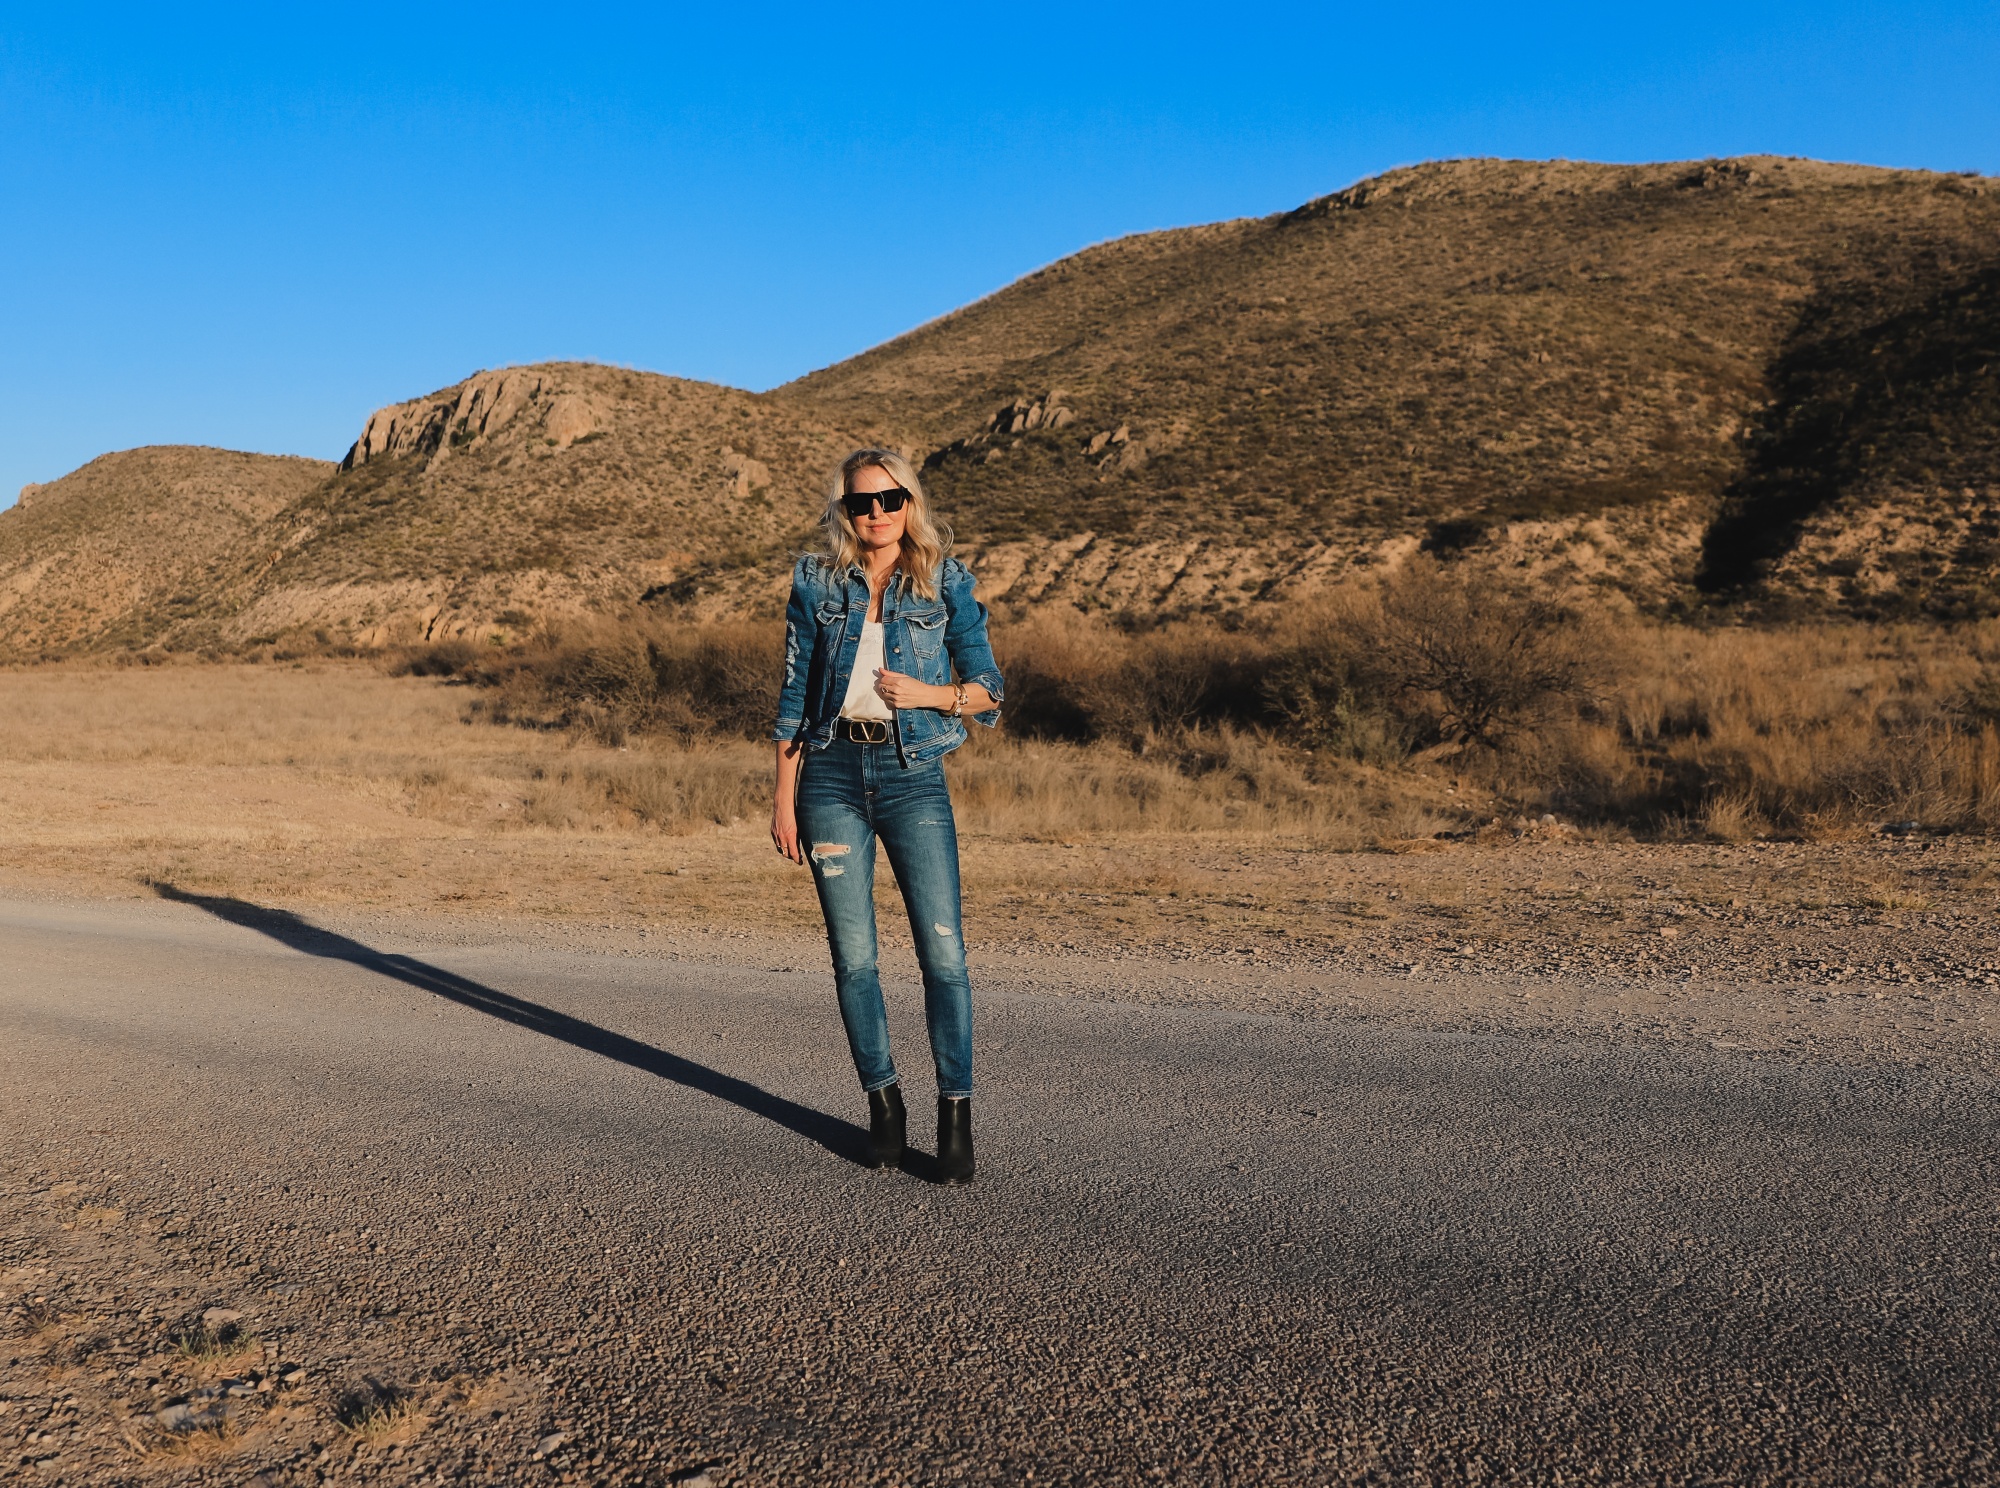 How To Wear Denim on Denim, Erin Busbee of Busbee wearing a distressed puff sleeve denim jacket by Retrofete, 7 For All Mankind distressed jeans, black Alexander Wang cutout booties, white B.P. lace cami, black cat eye sunglasses, and Julie Vos gold cuff bracelets in West Texas